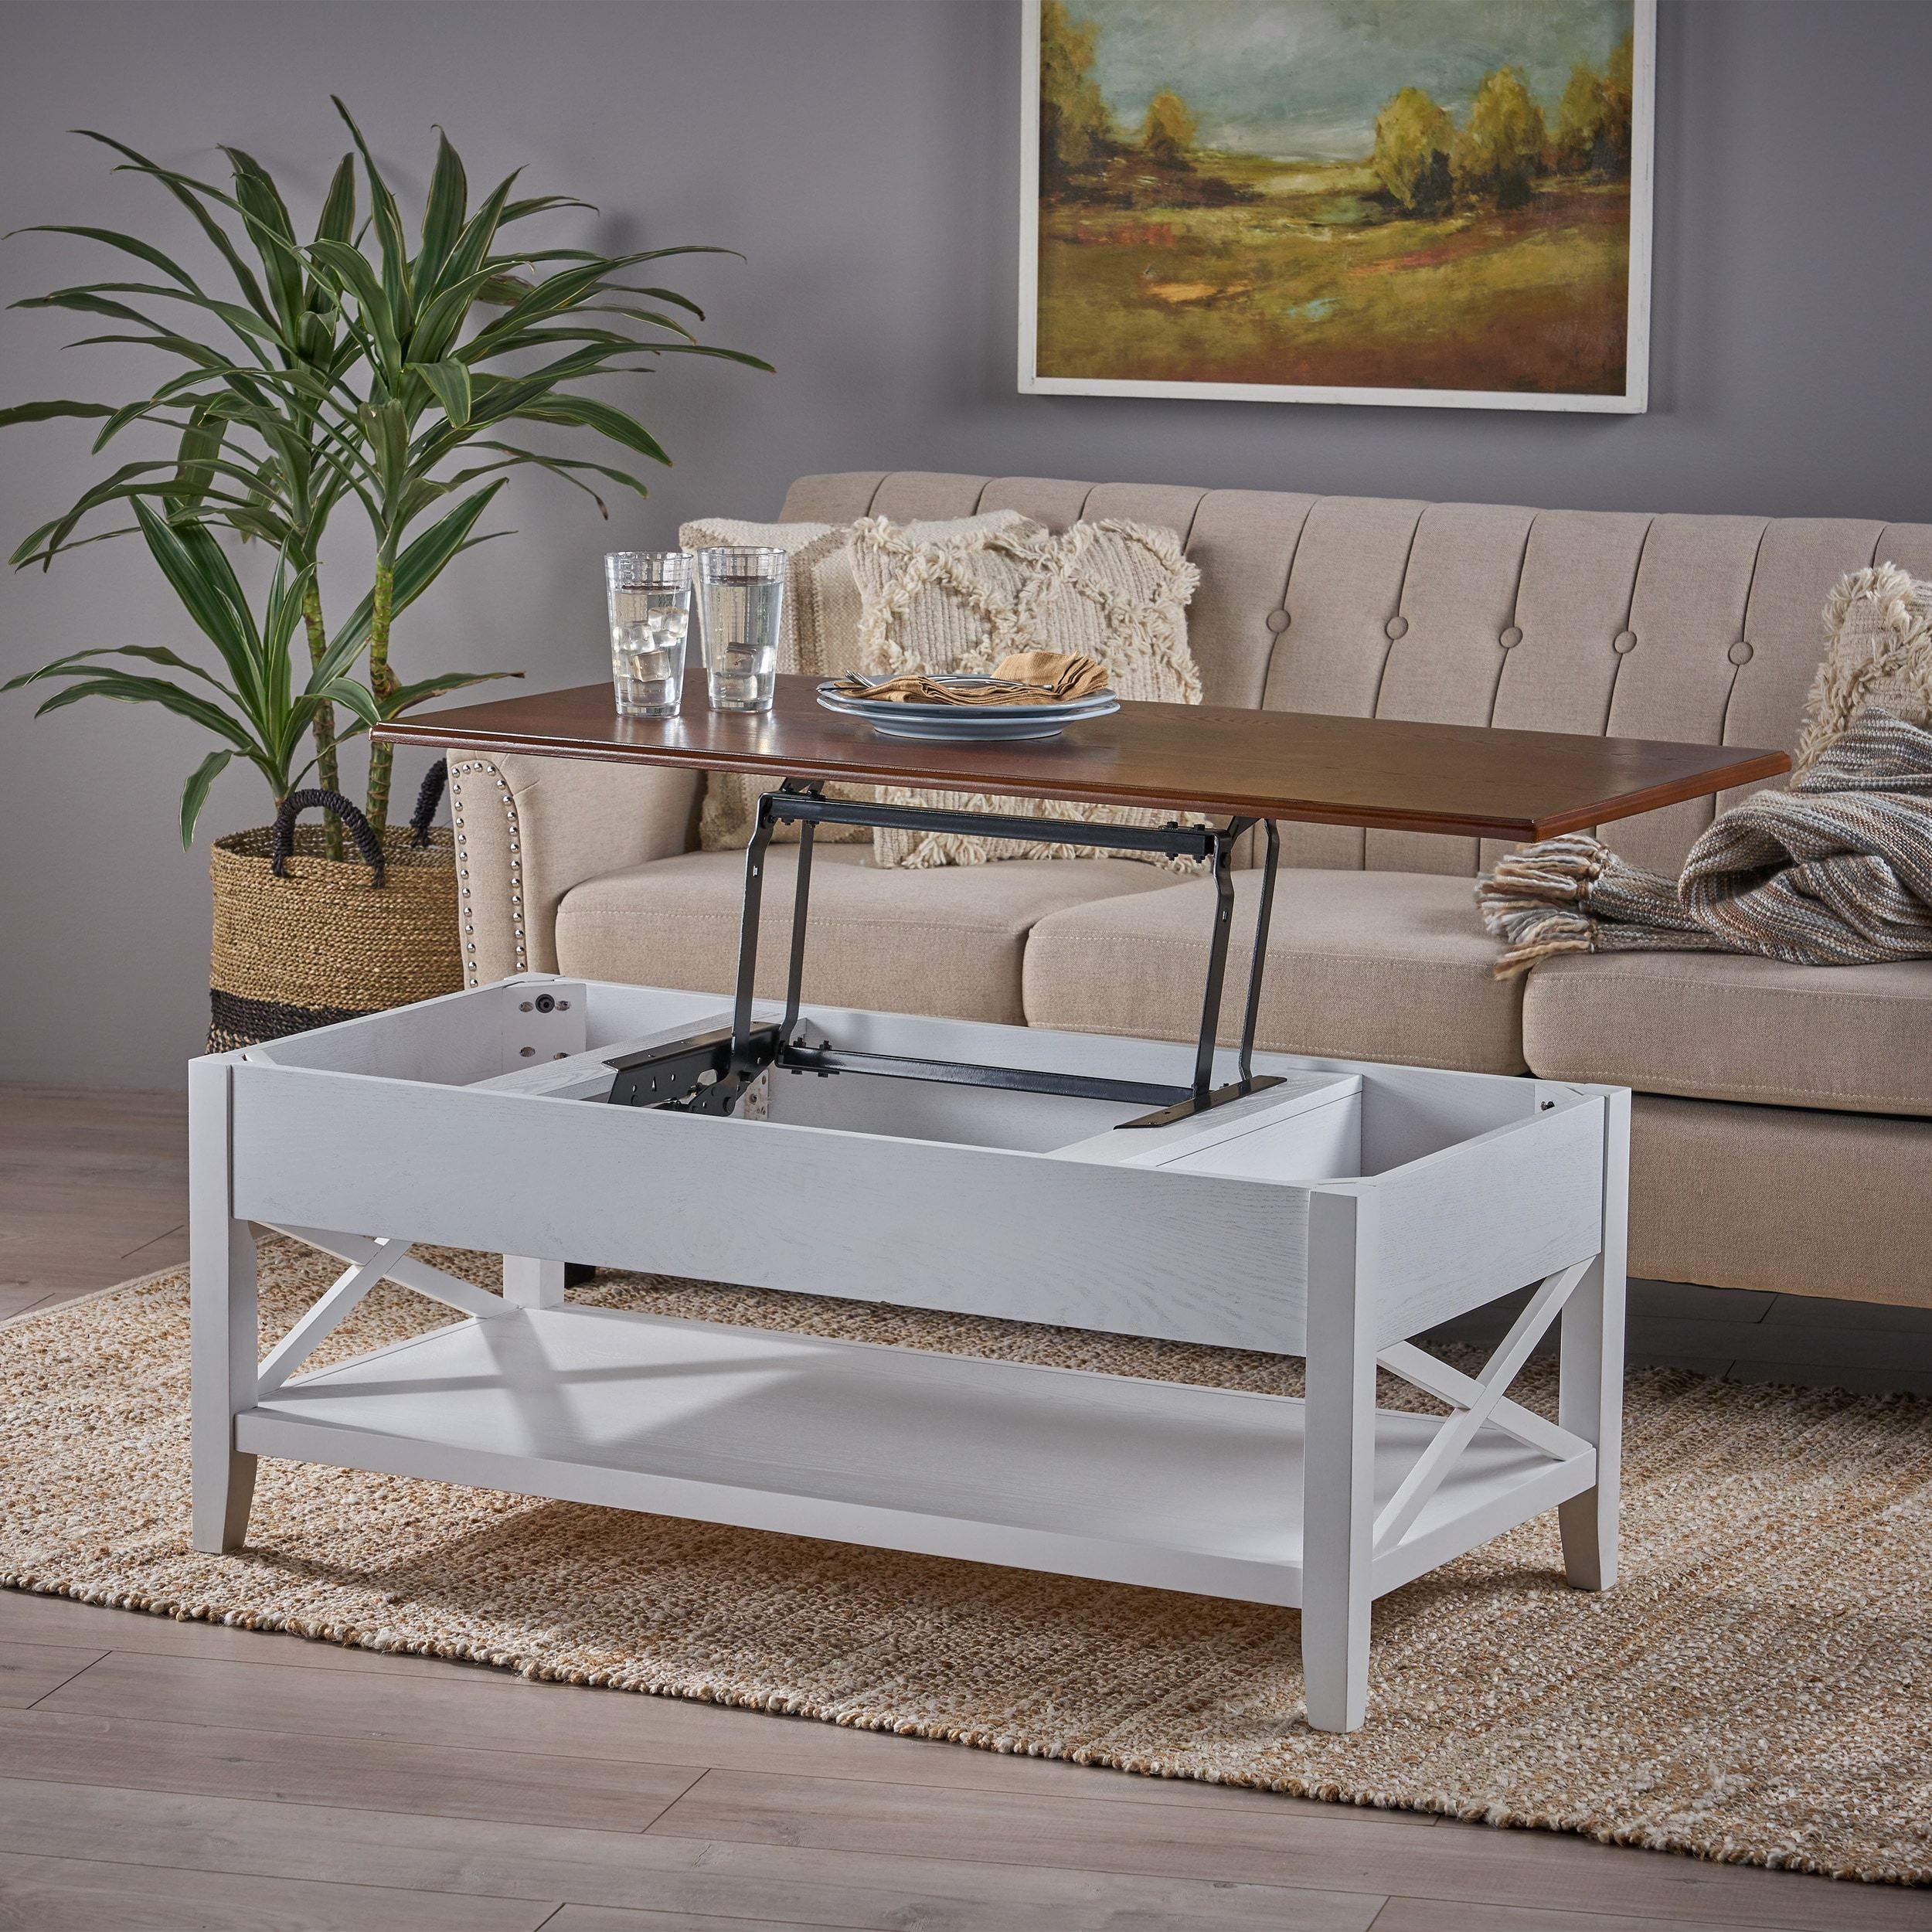 Decatur Farmhouse Lift Top Coffee Tablechristopher Knight Home – On  Sale – Overstock – 26292450 Pertaining To Lift Top Coffee Tables (View 4 of 15)